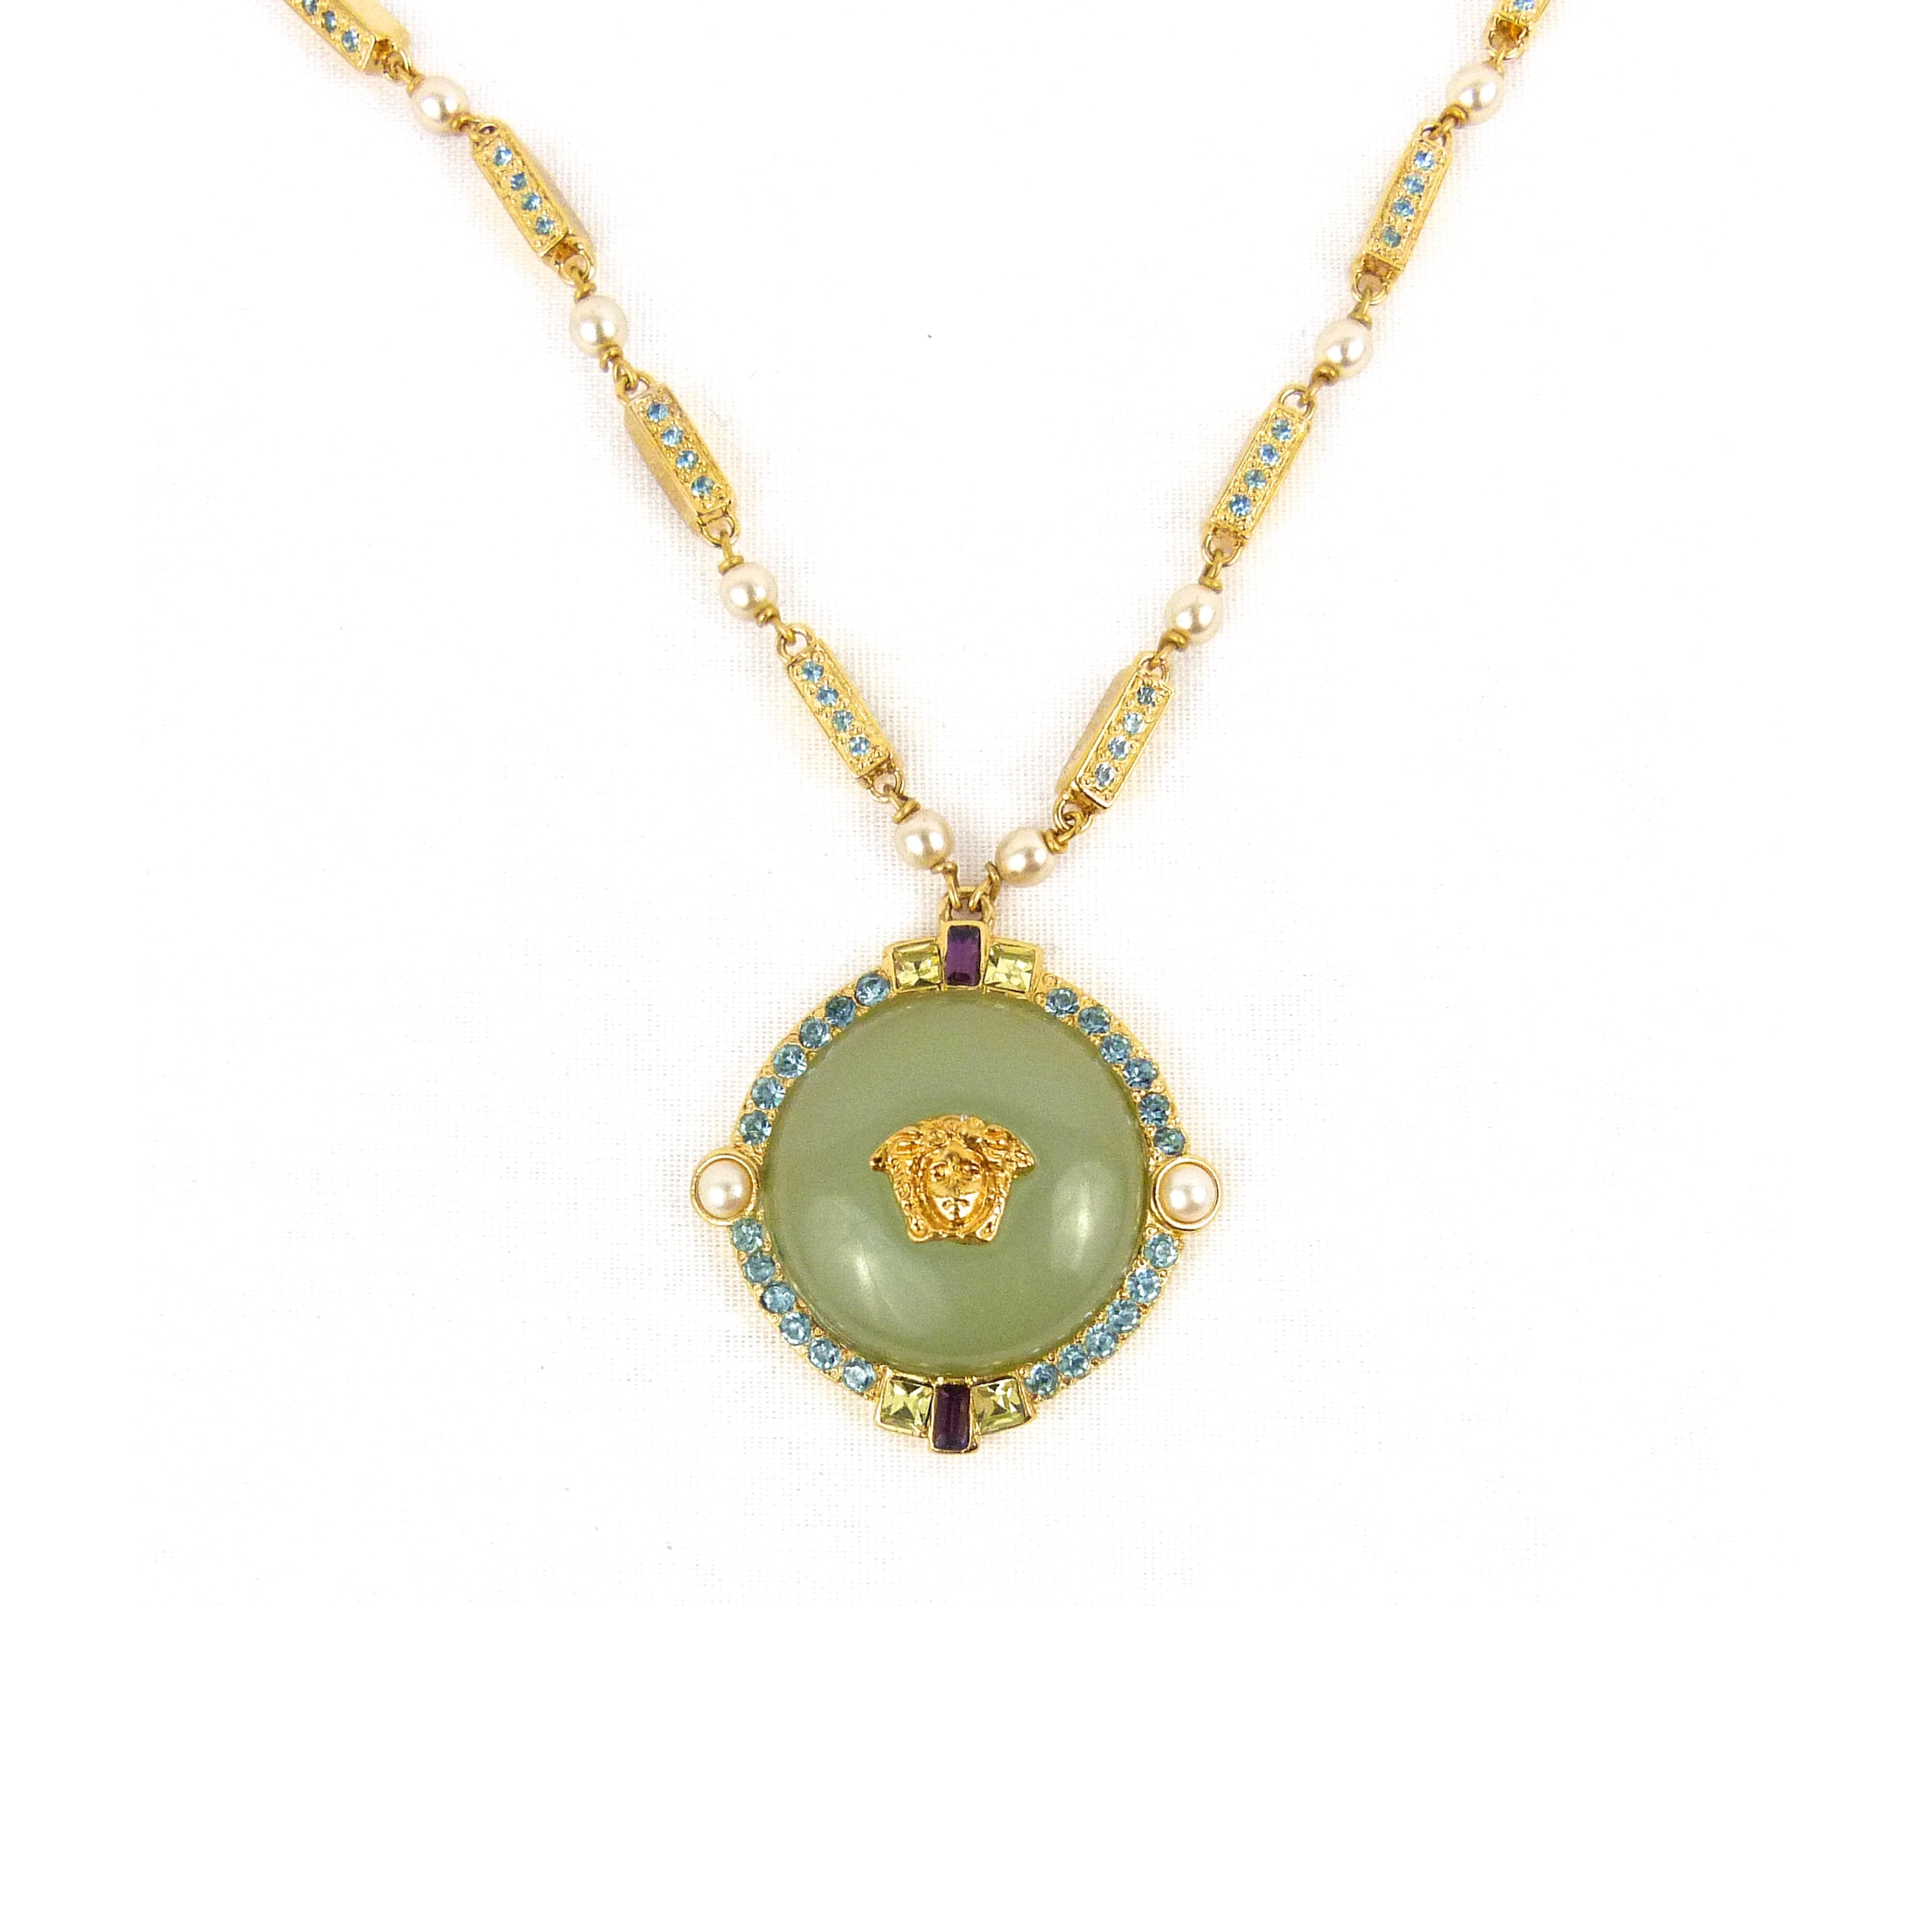 This Gianni Versace jade green pendant necklace is made up of gold tone metal rectangle link chain with fuchsia pink and green stones. They have carefully placed a faux pearl inbetween each link adding a touch of opulence. The pendant itself is made